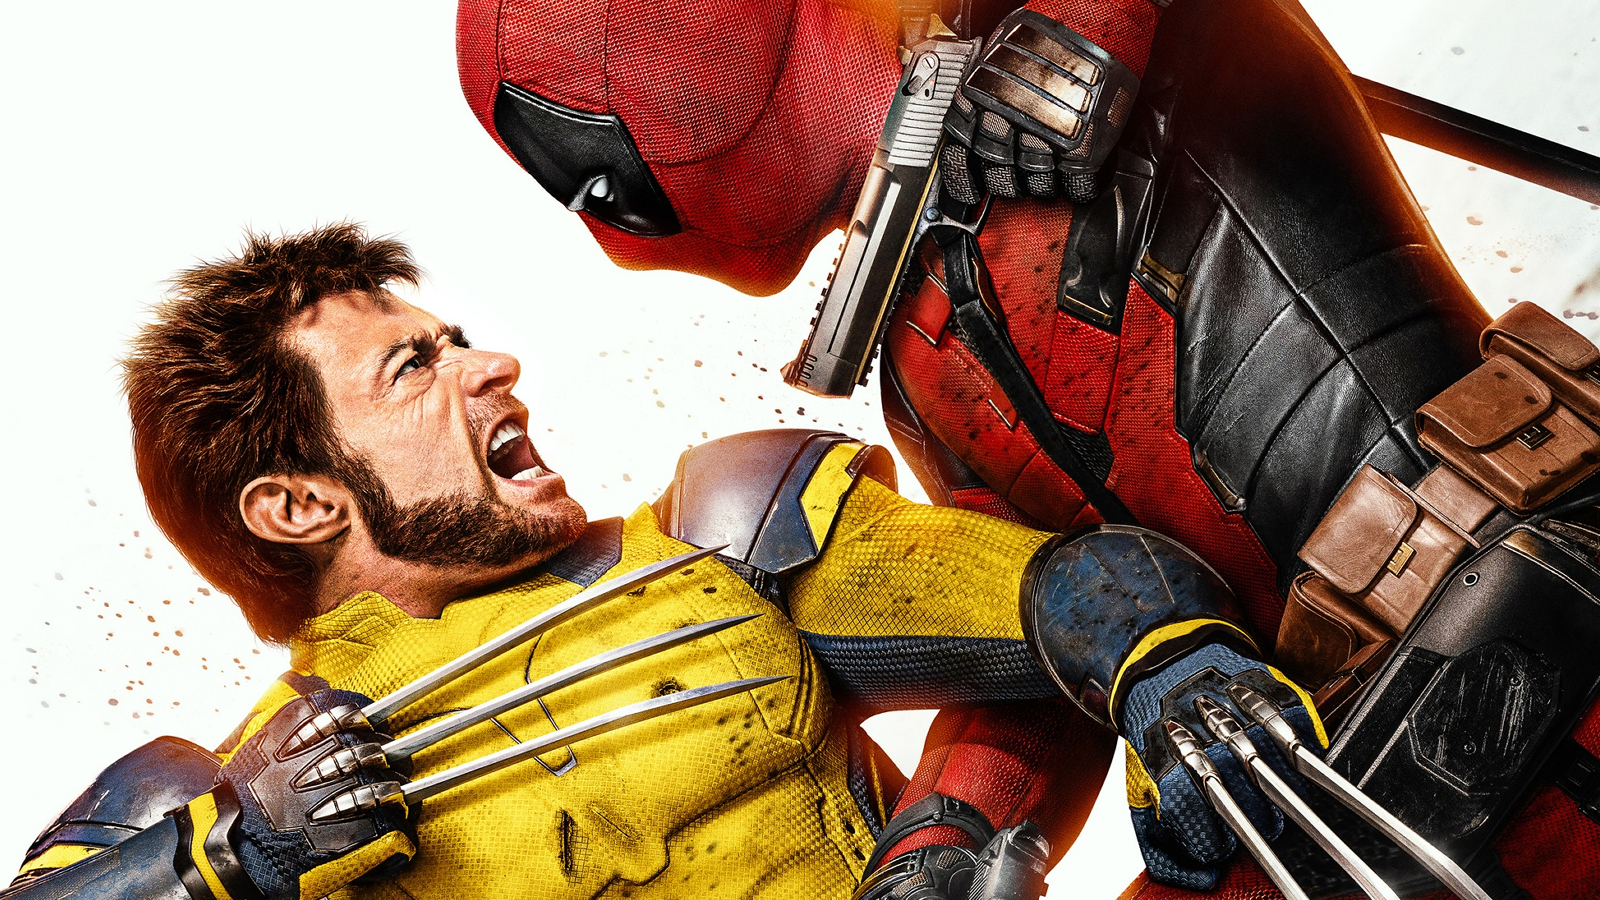 Cropped key art for Deadpool & Wolverine depicting a fight between Wolverine and Deadpool